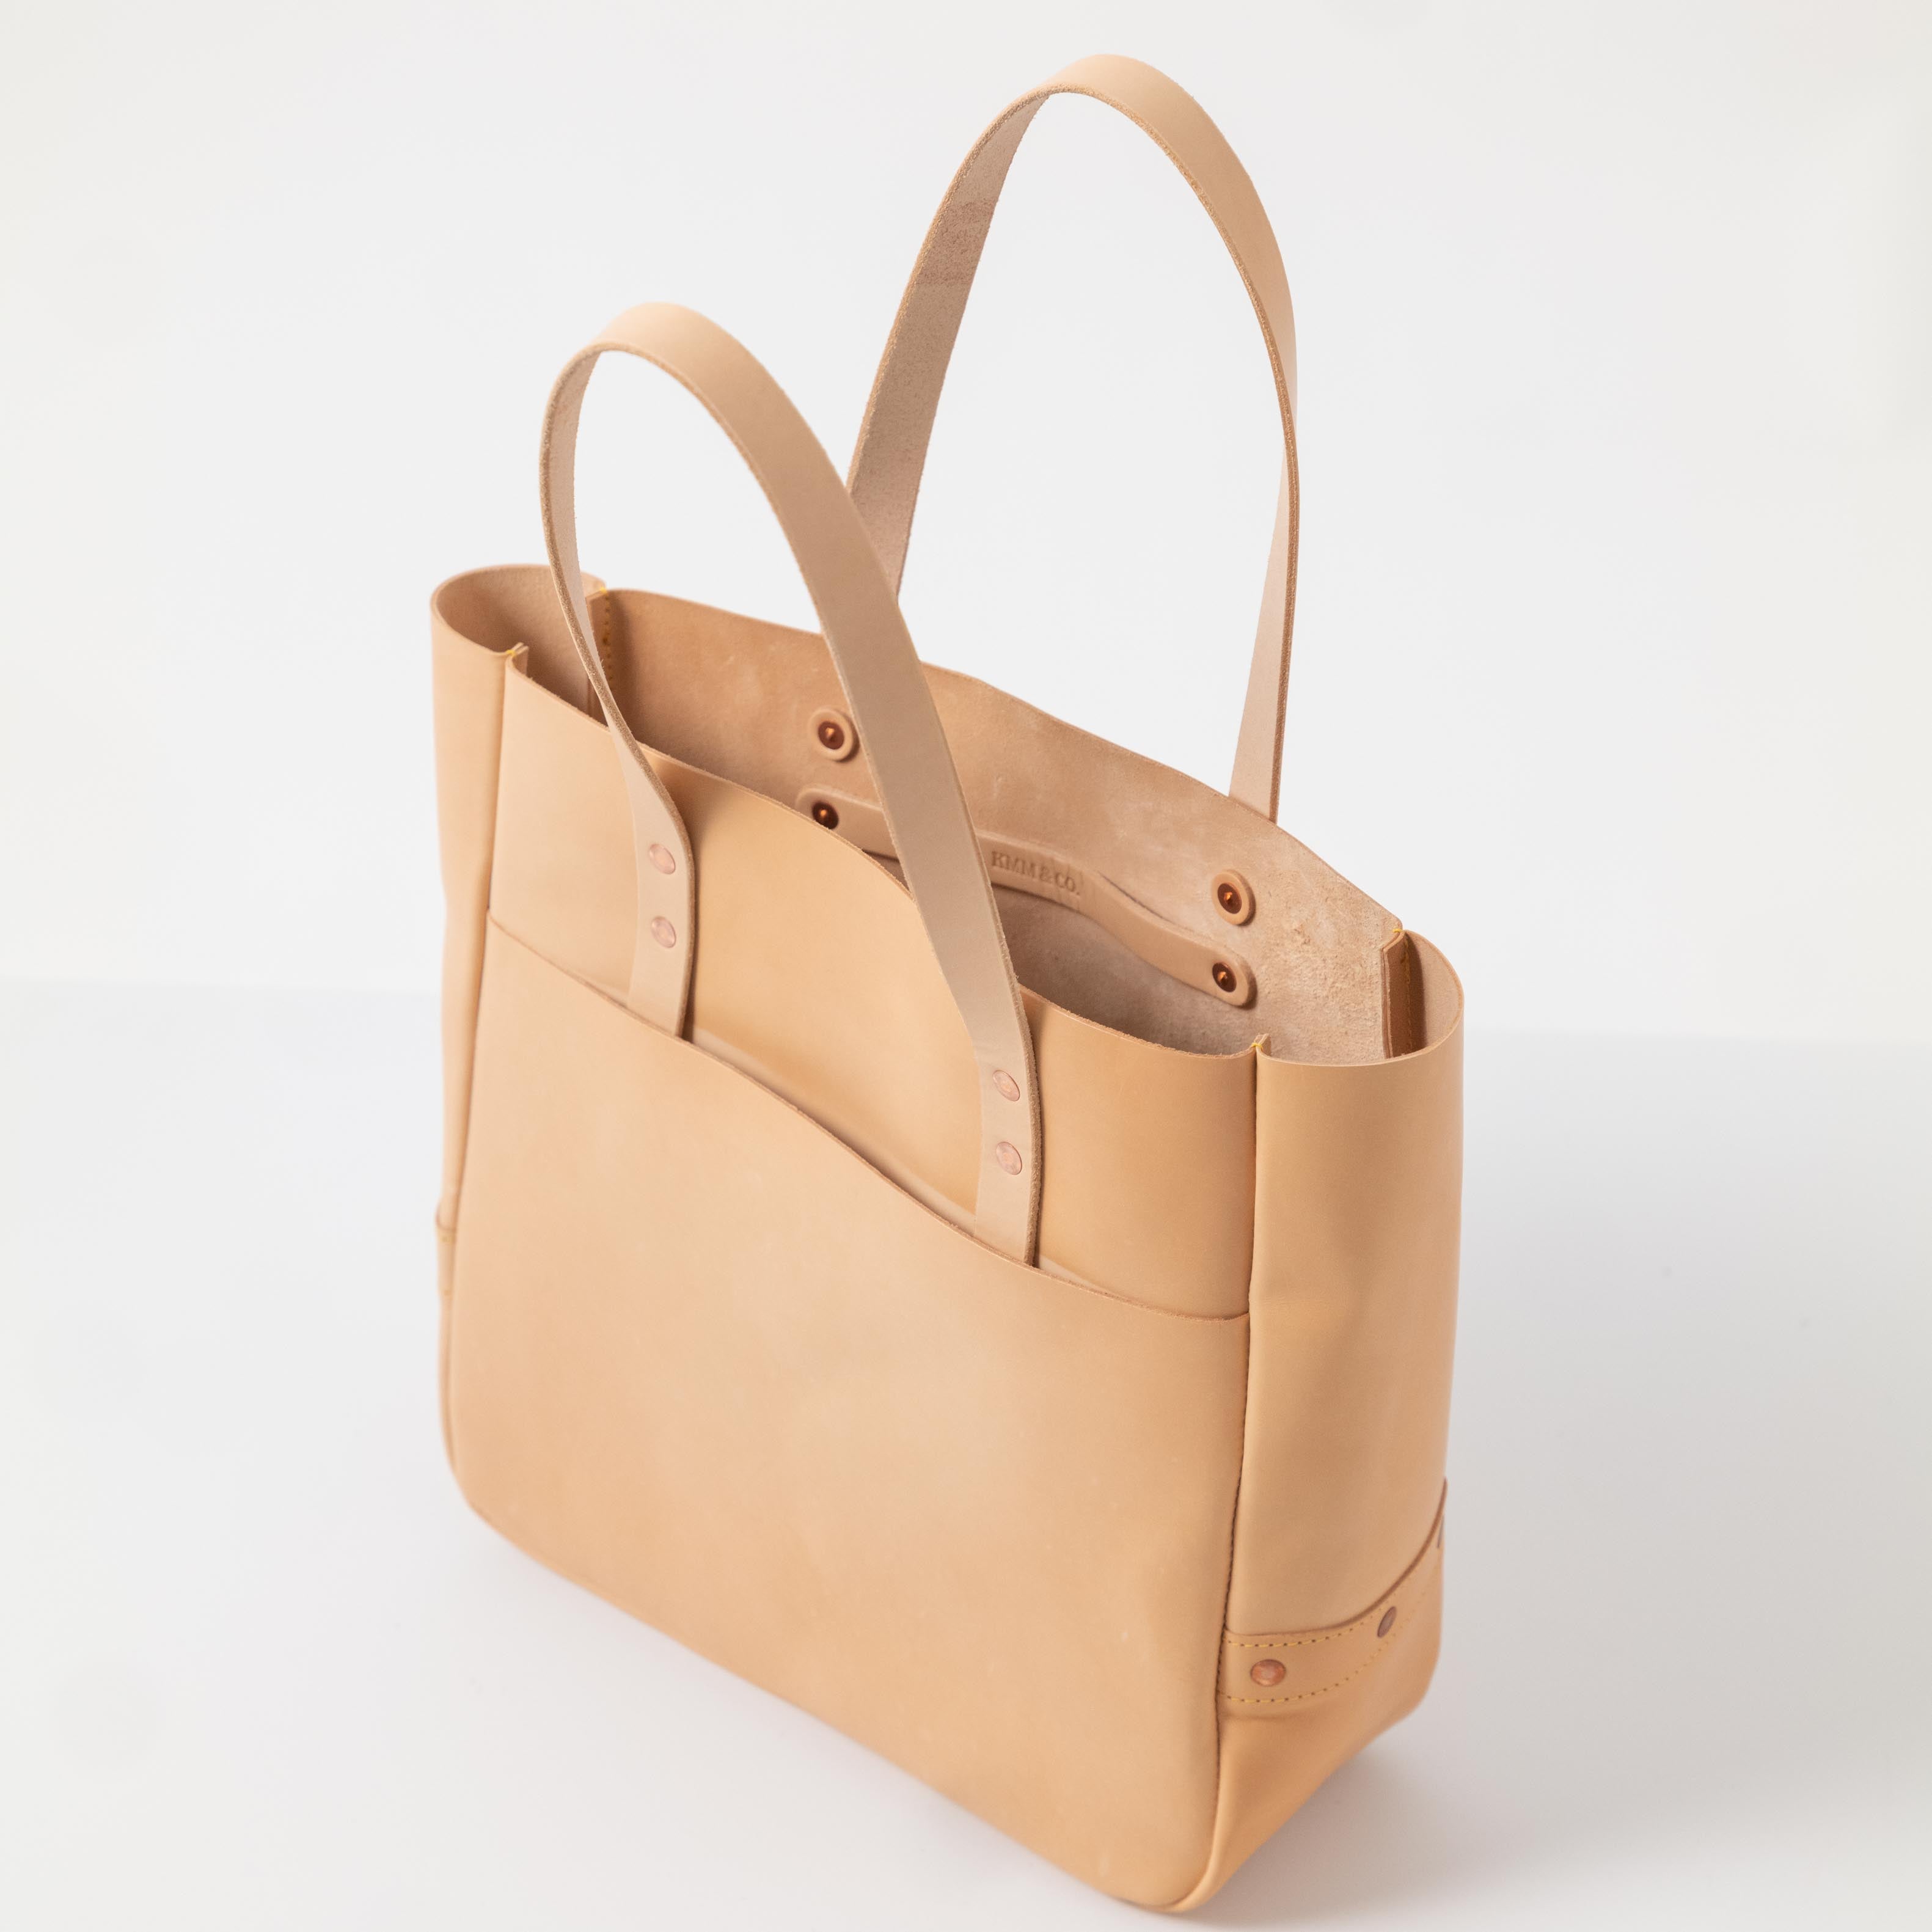 Vegetable Tanned Carryall Tote